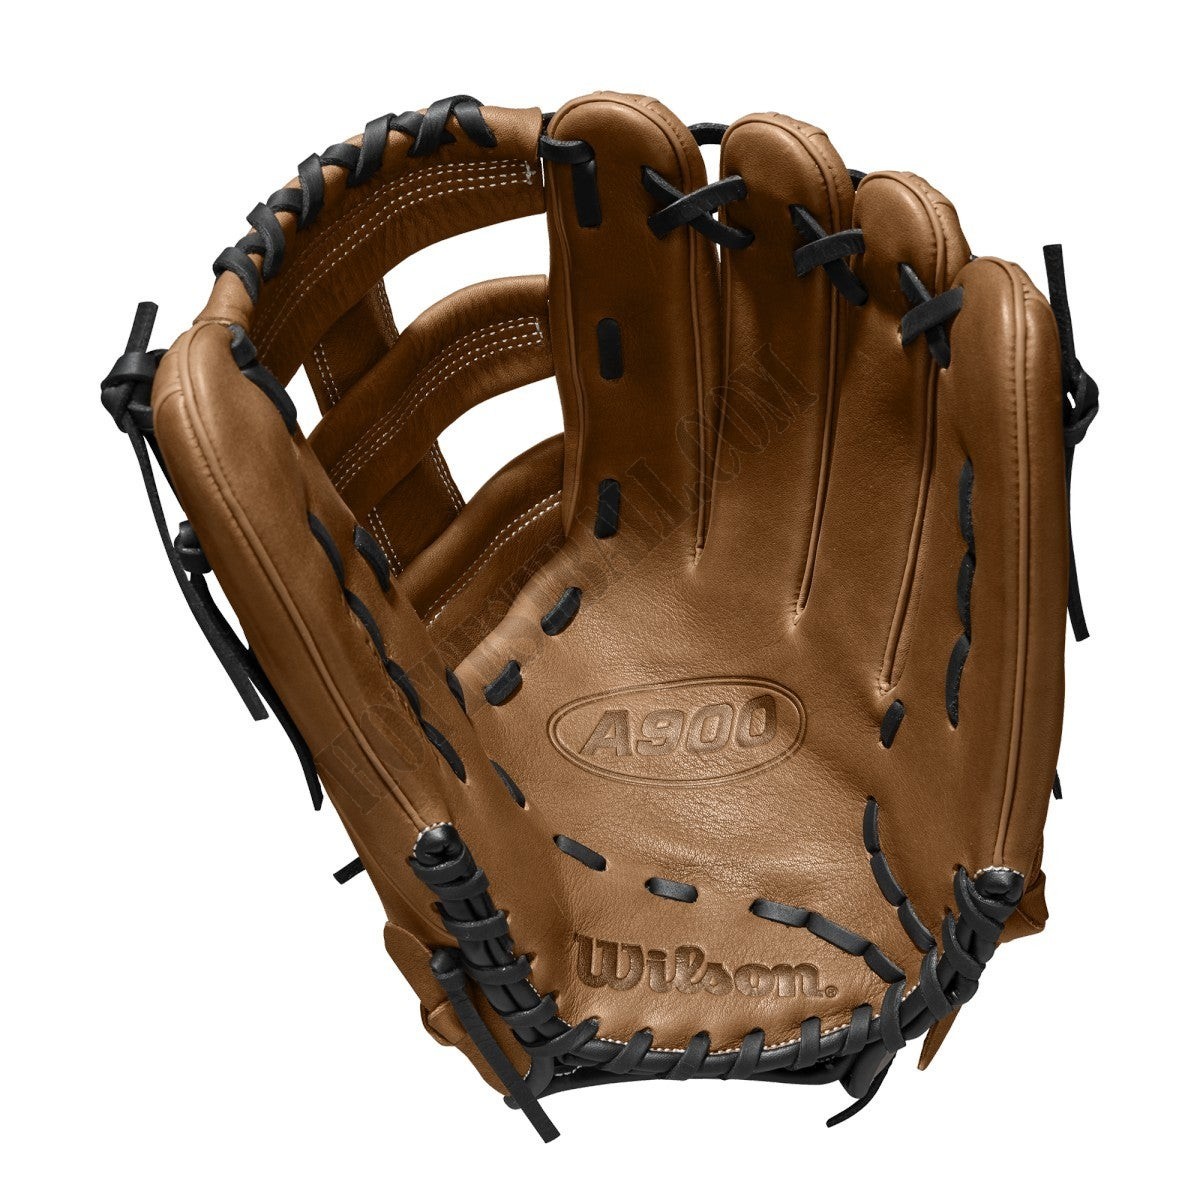 2020 A900 13" Slowpitch Glove ● Wilson Promotions - -2